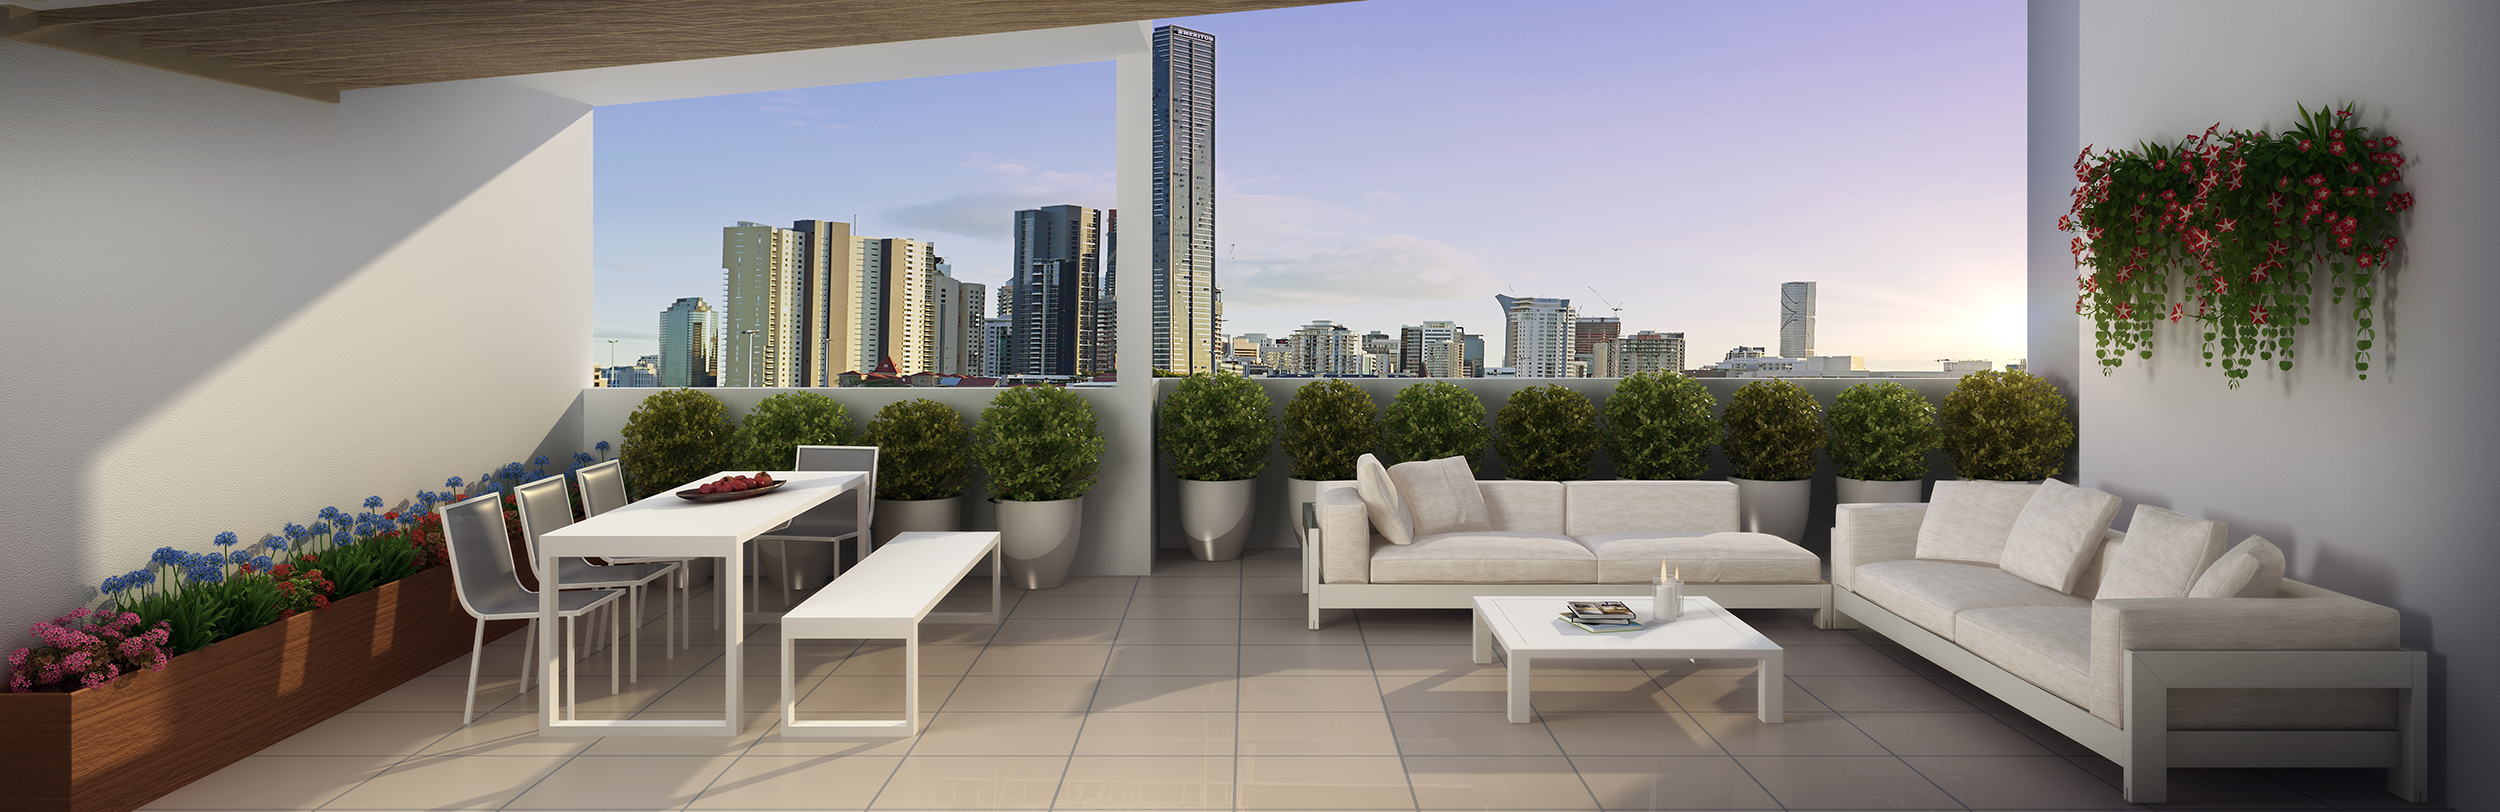 large balcony of the winn with panoramic views of the brisbane city skyline and balcony planting